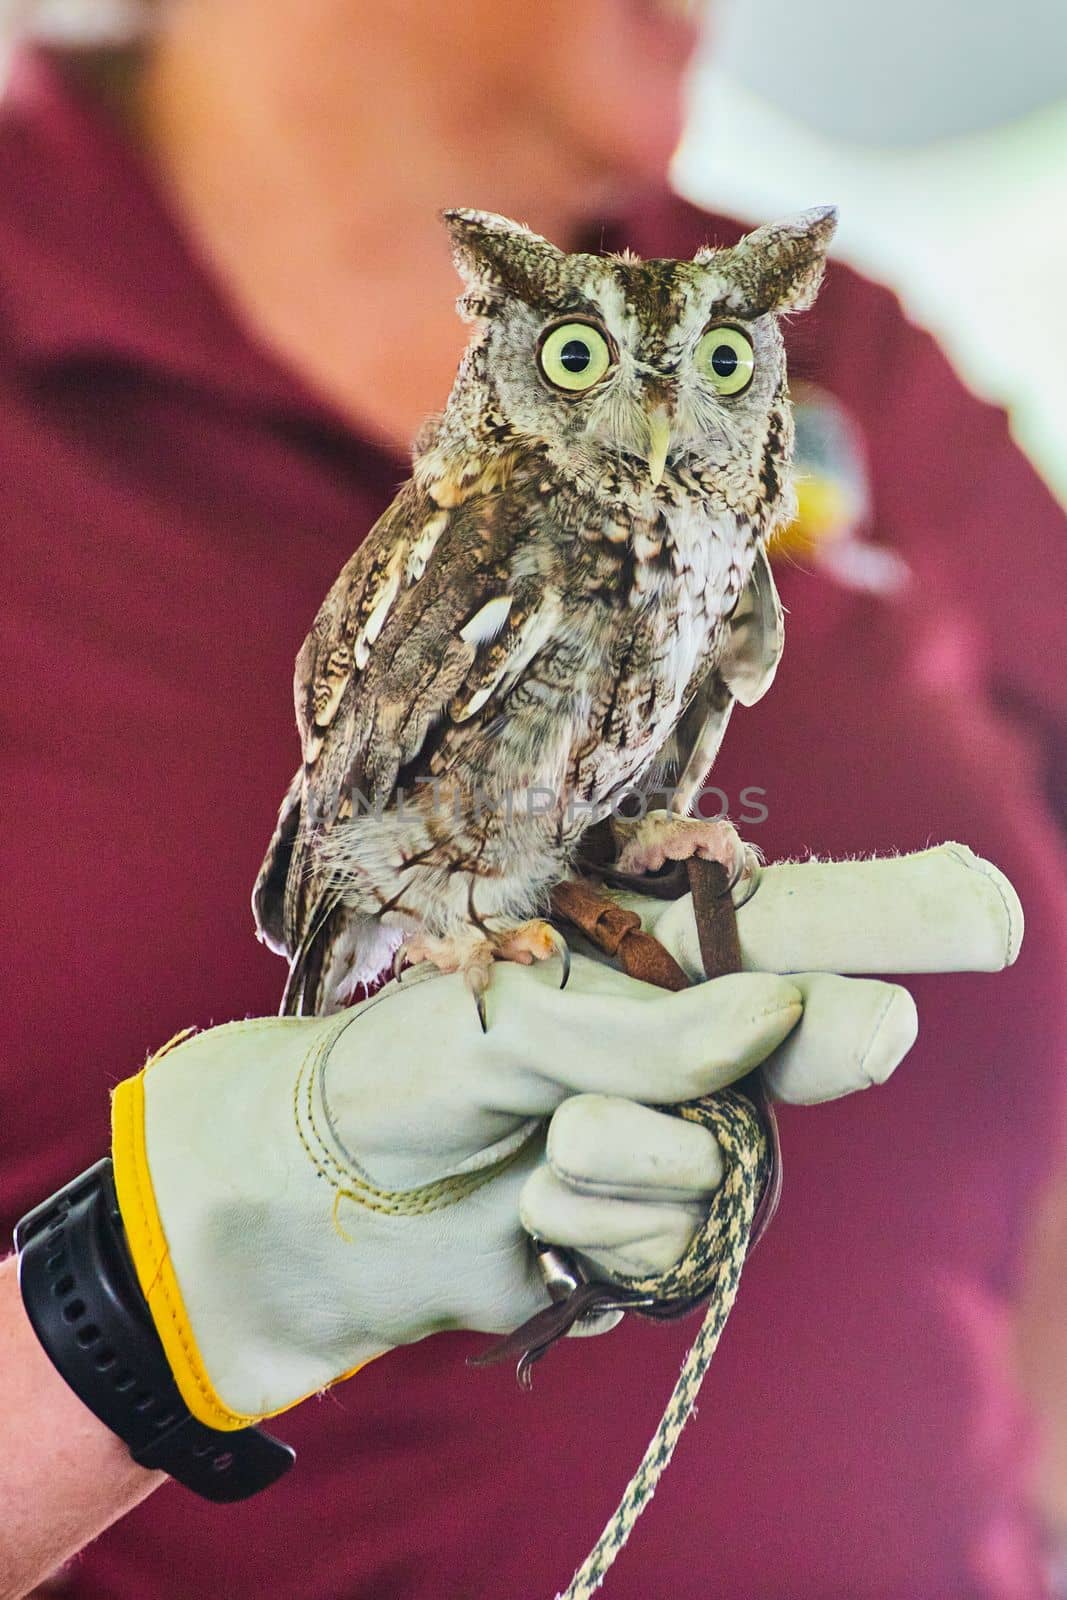 Image of American Eastern Screech Owl raptor tamed and on leather glove of trainer